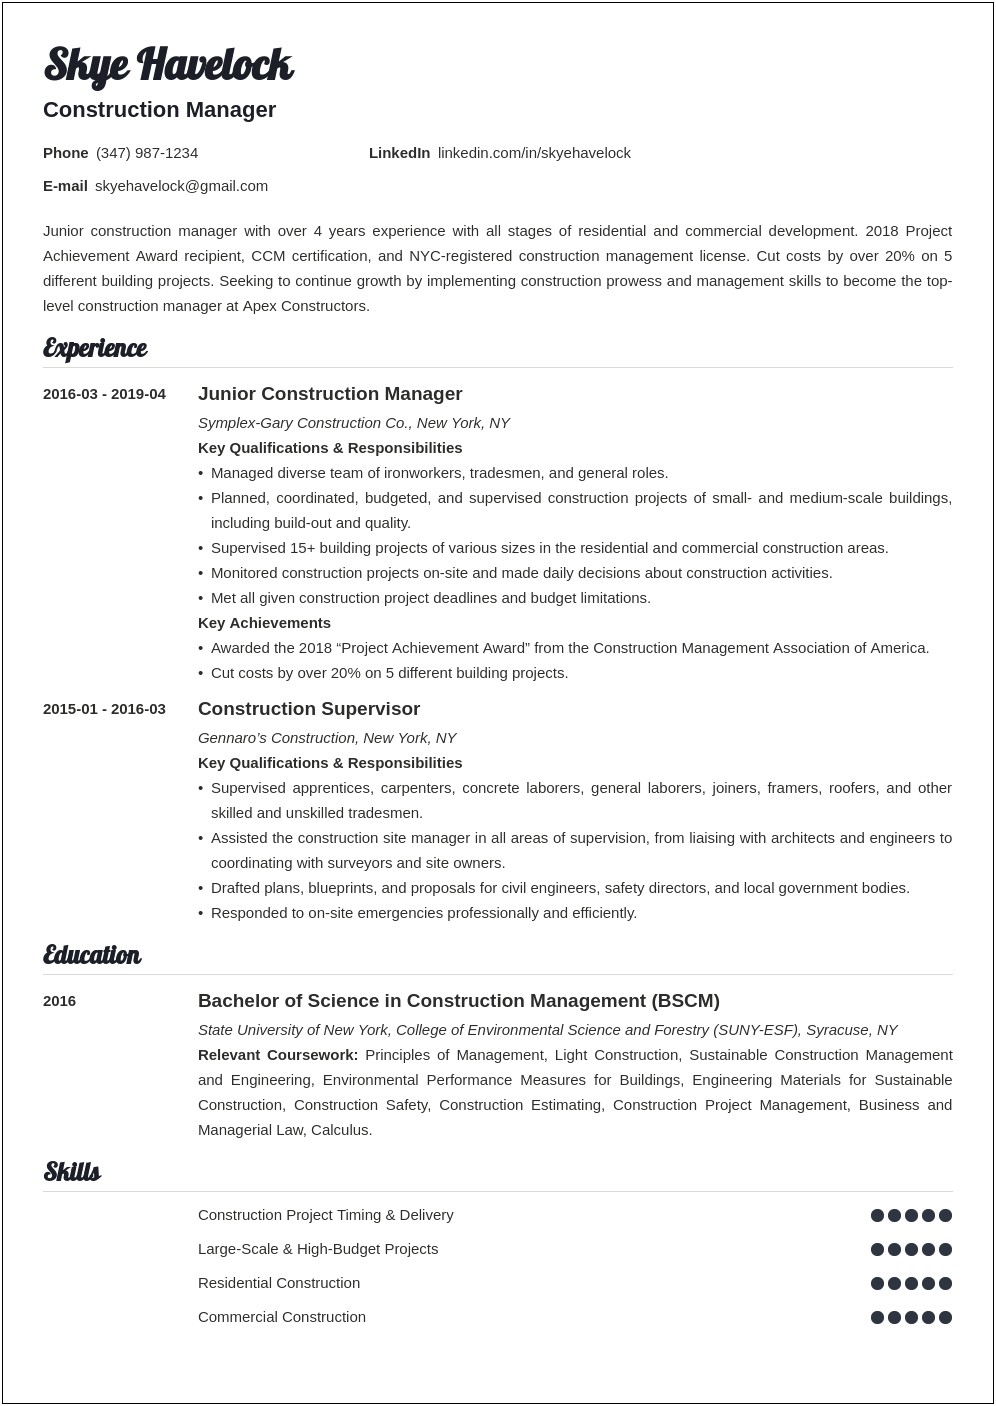 Resume Objective Statement For Project Manager